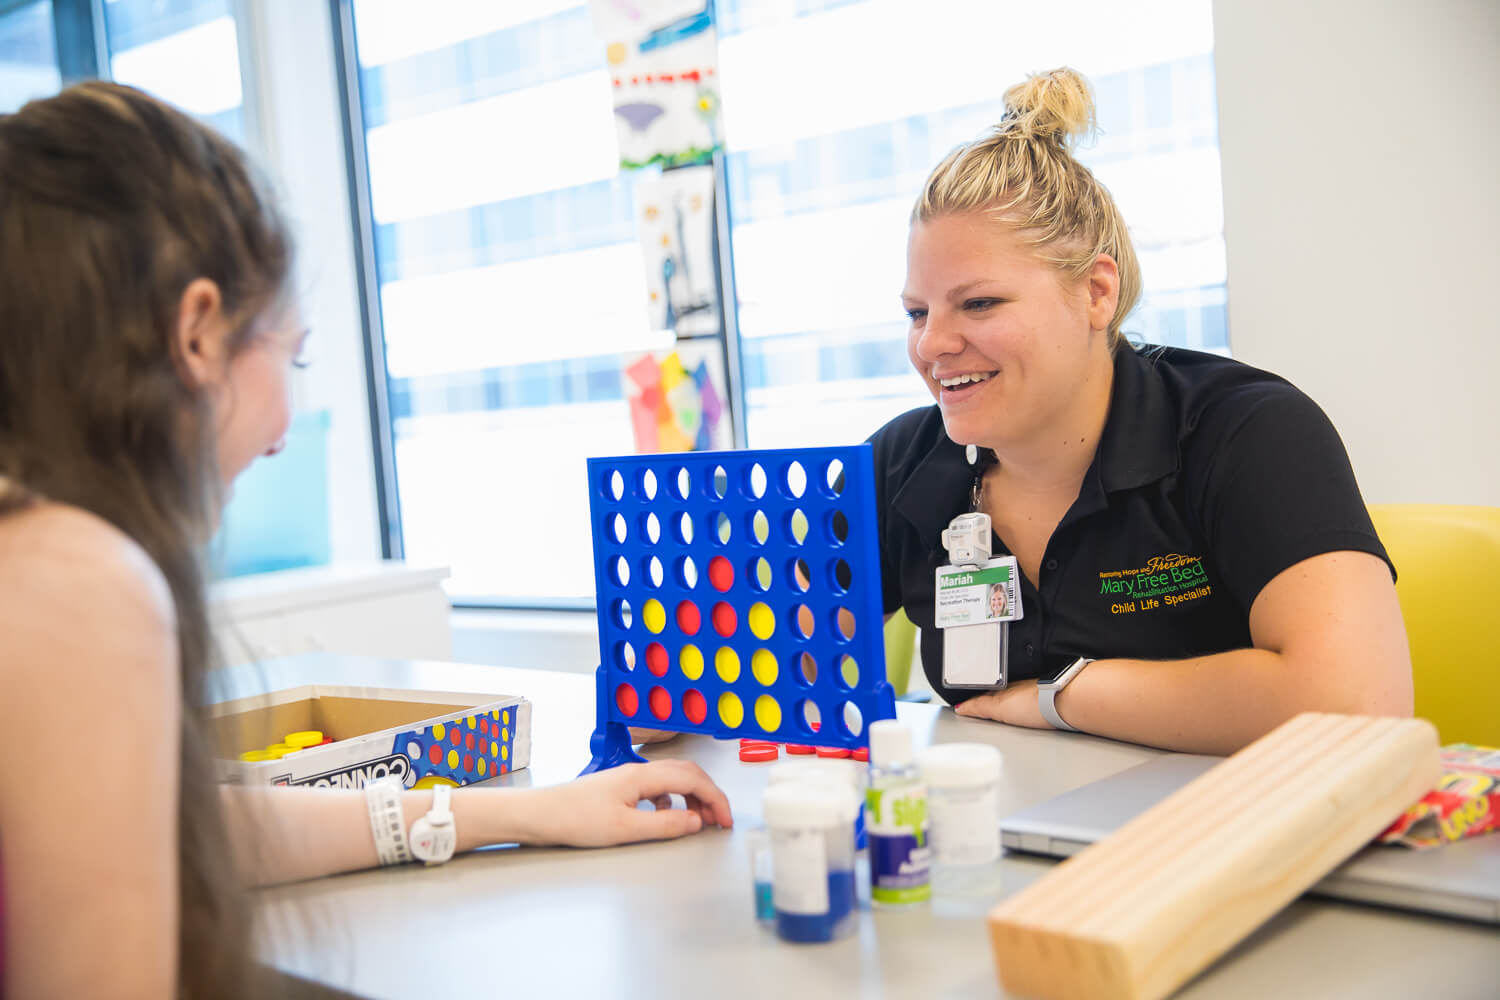 A child life specialist wearing a black short-sleeved shirt and a blond top knot plays Connect Four with a young patient. The patient's back is to the camera and the two are in a room lit with large windows. 